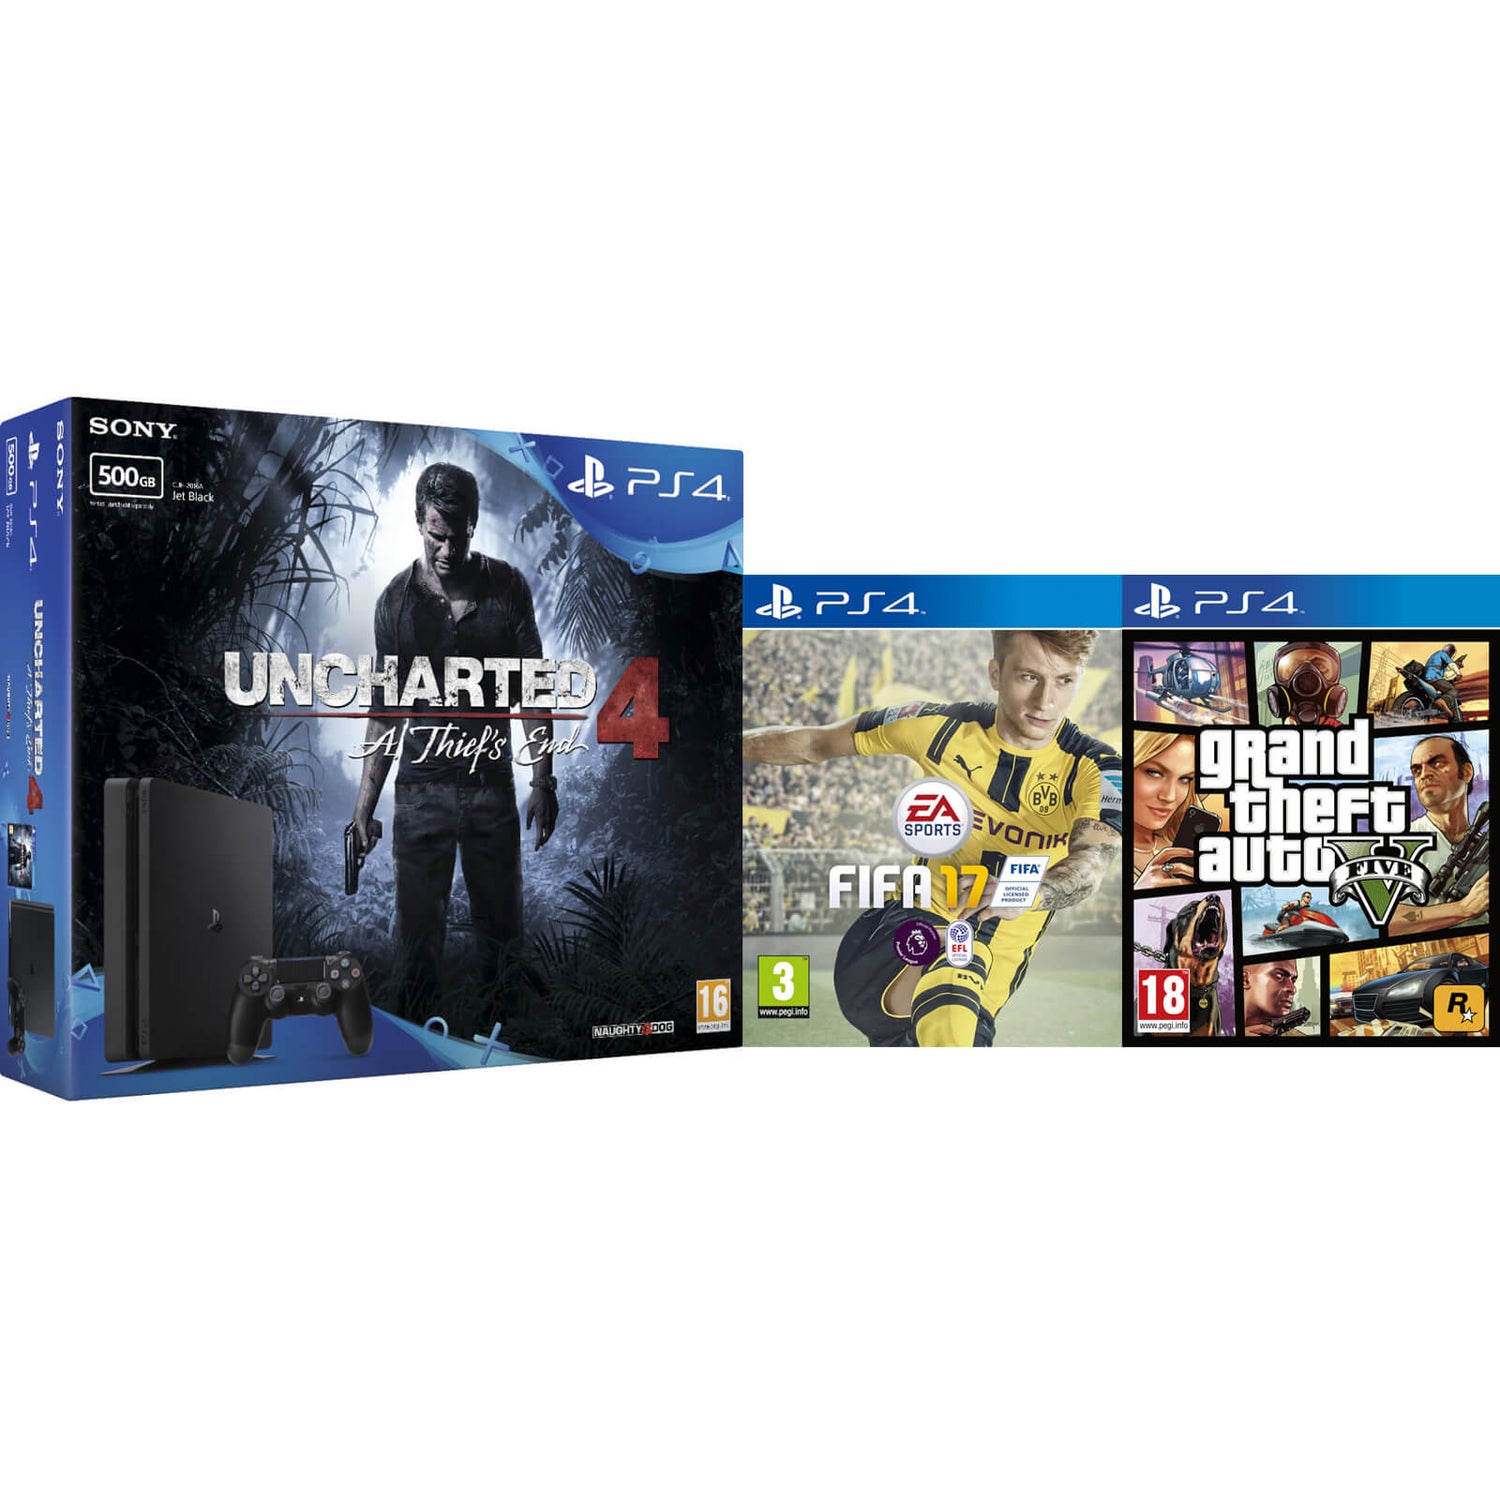 PlayStation 4 Slim 500GB With Uncharted 4, FIFA 17 and GTA V Games Consoles  - Zavvi UK